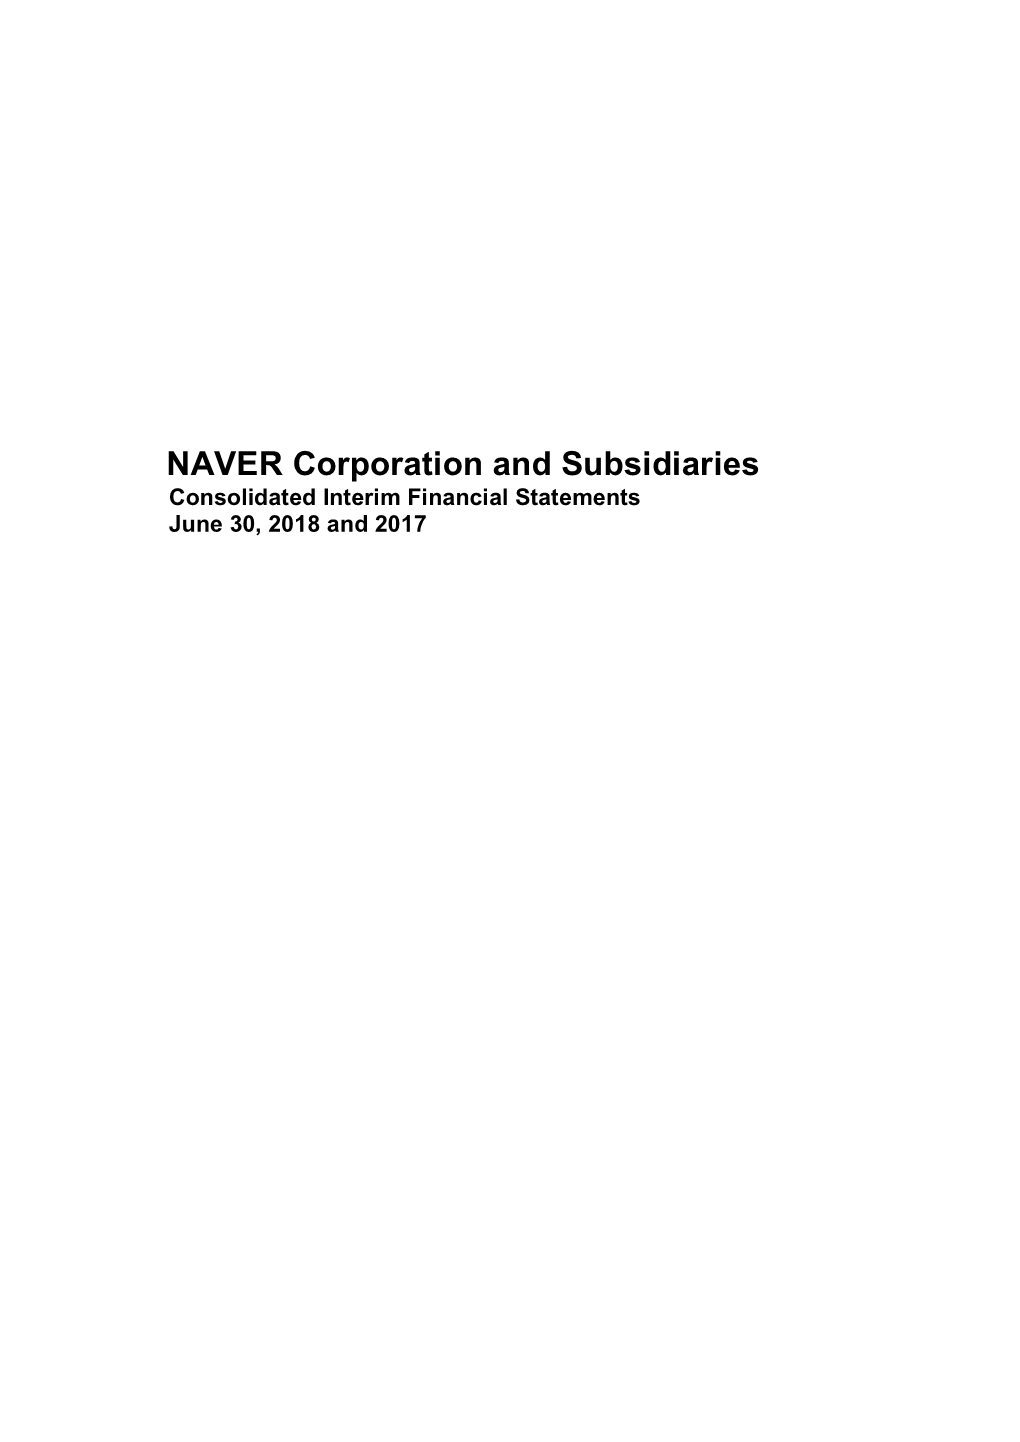 NAVER Corporation and Subsidiaries Consolidated Interim Financial Statements June 30, 2018 and 2017 NAVER Corporation and Subsidiaries Index June 30, 2018 and 2017